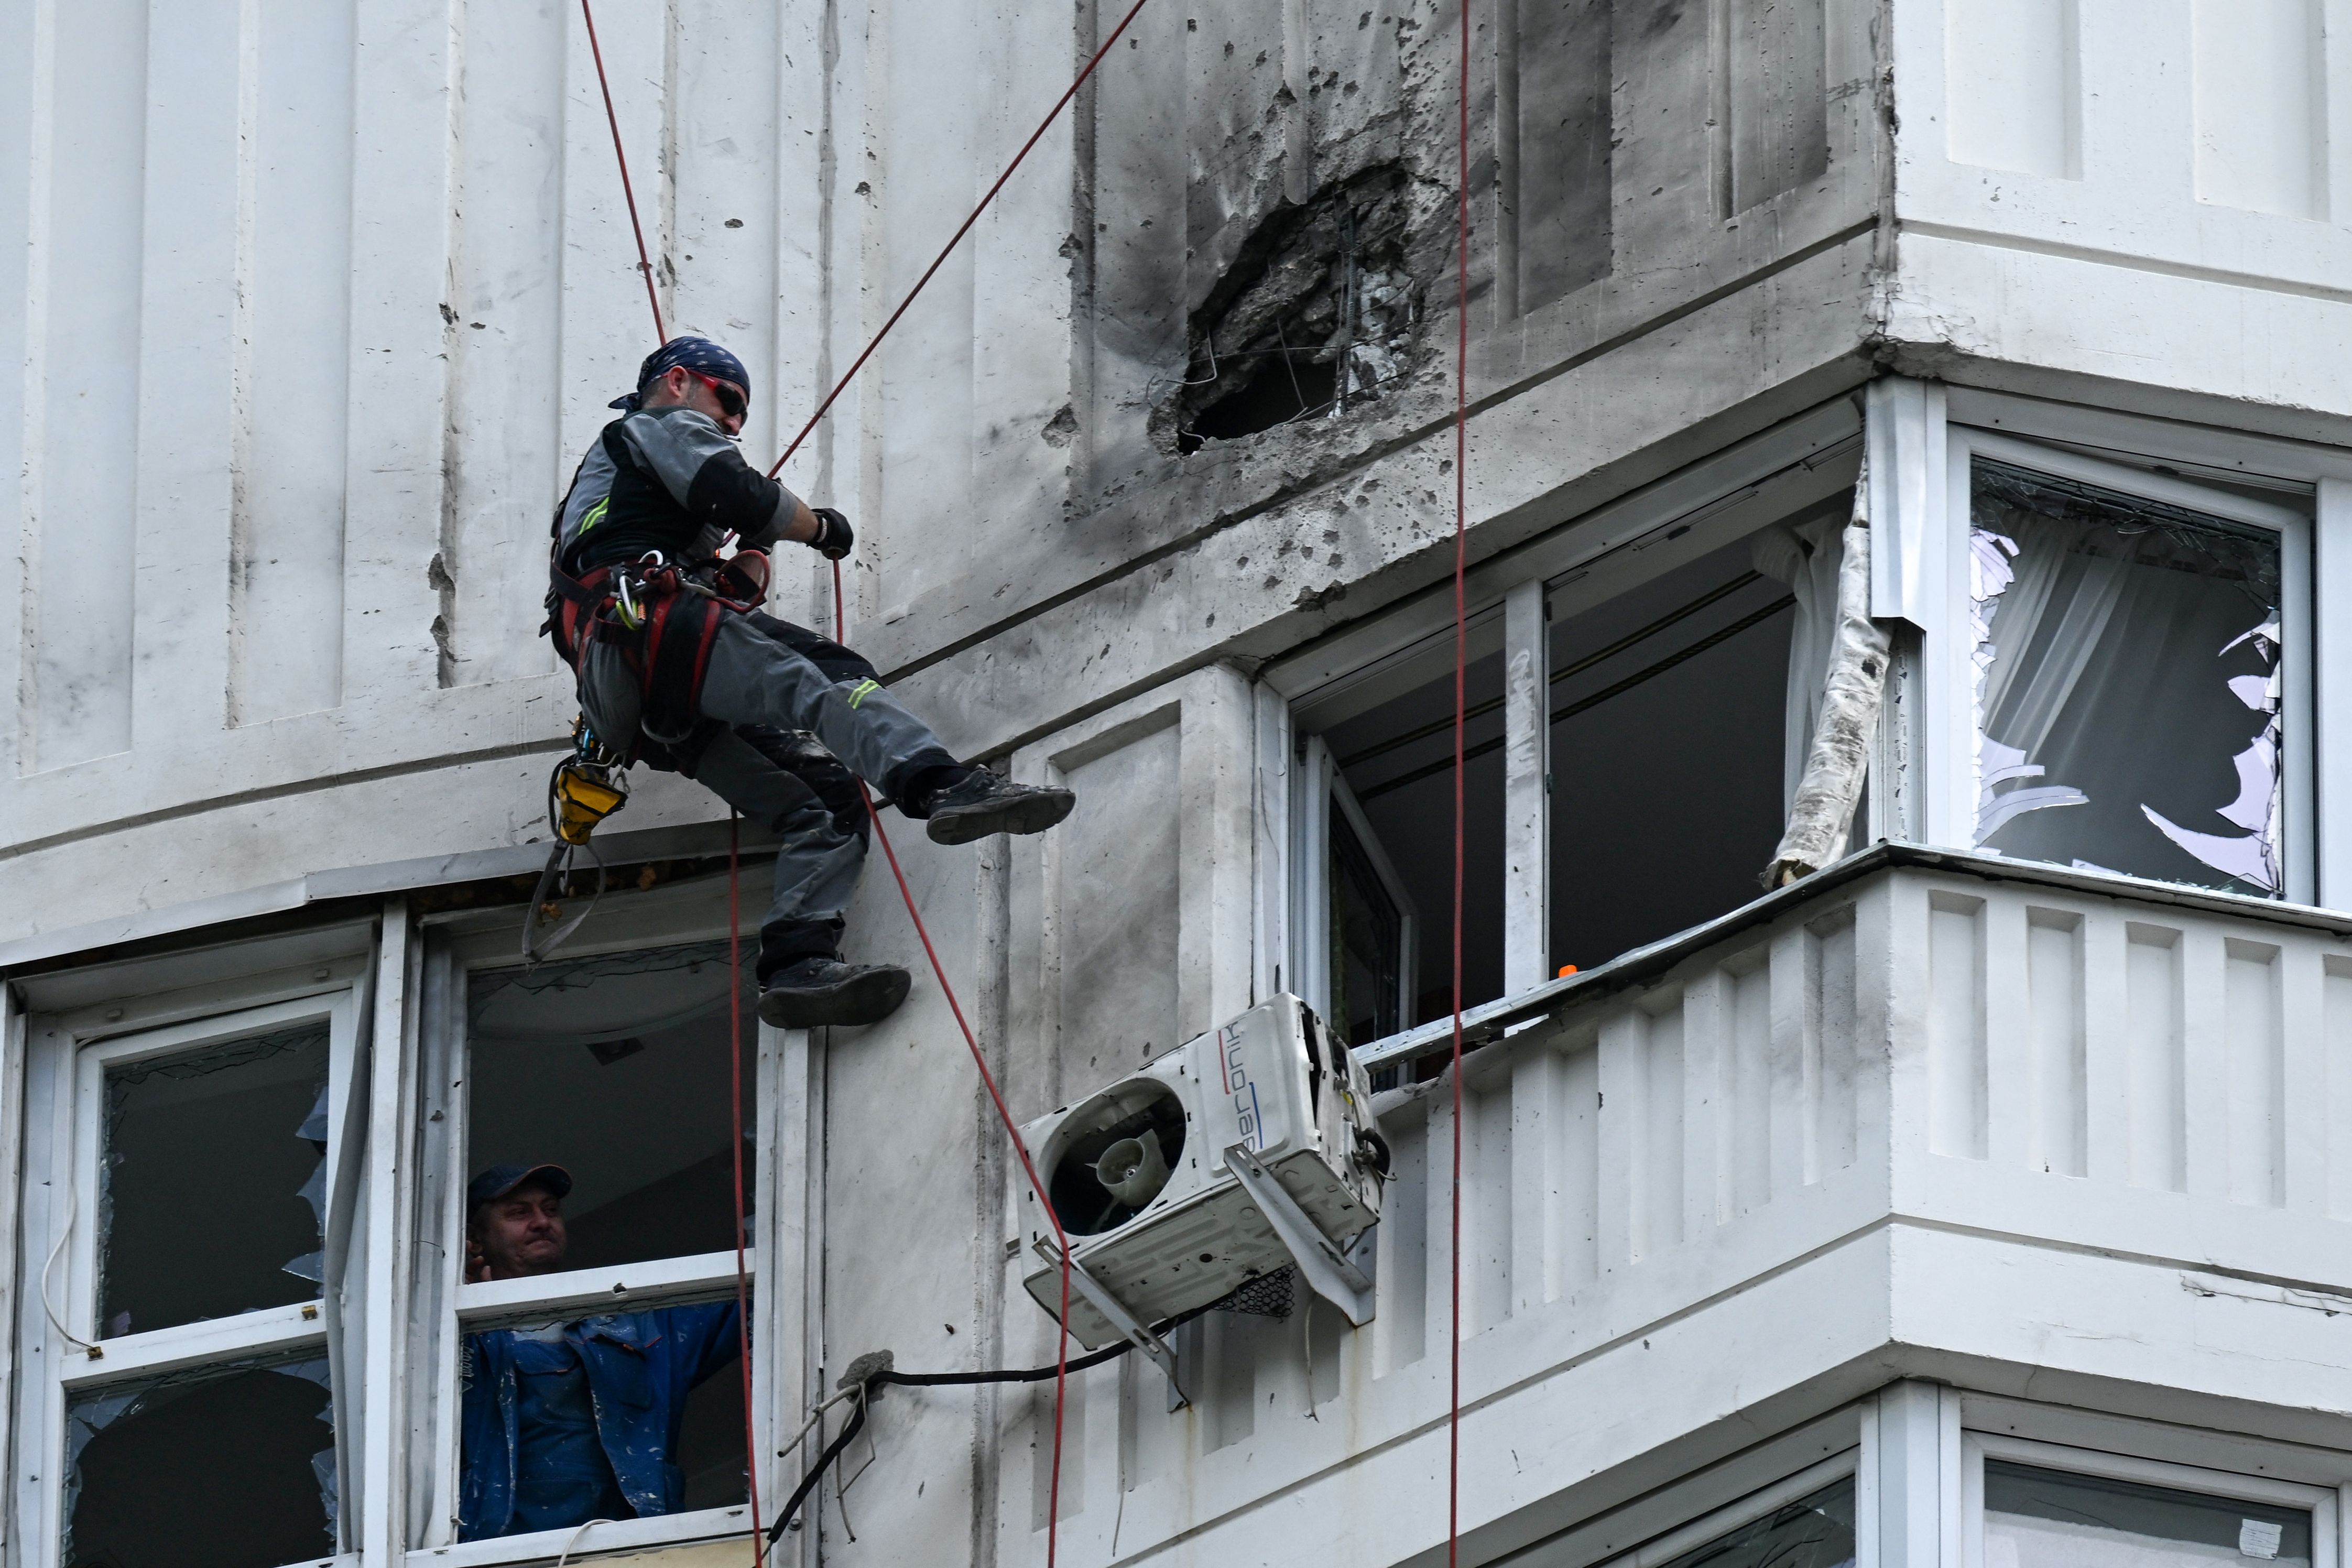 A person inspects the damaged face of an apartment building after a drone attack in Moscow on Tuesday.